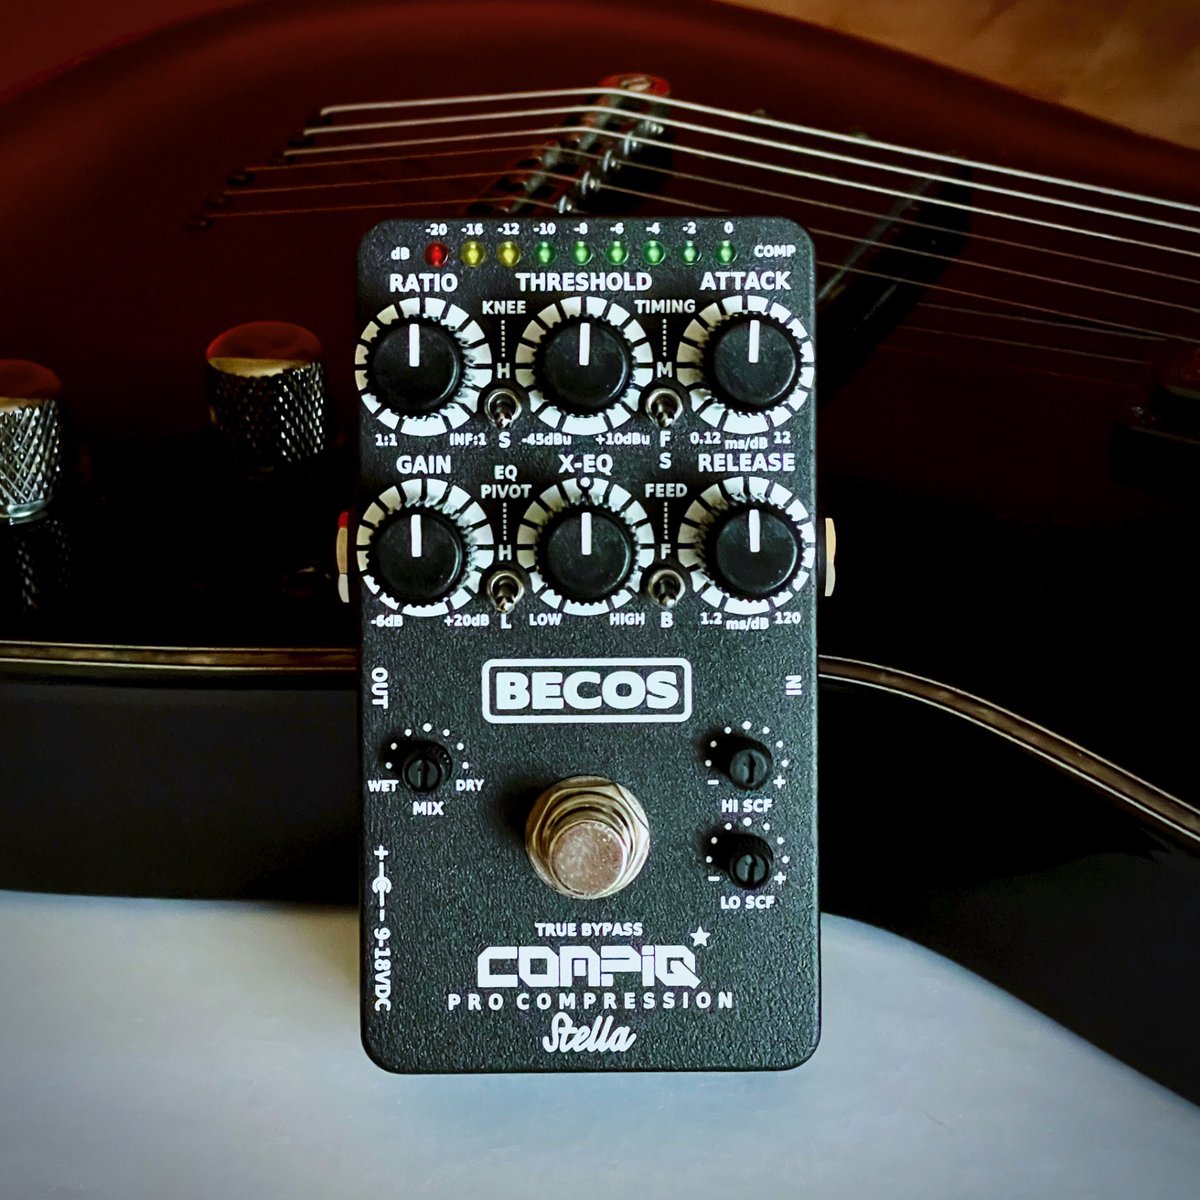 Master your stage sound 🎸

#becosfx #compiqstella #compressorpedal #thatcorp #burrbrown #vcacompressor #studiocompressor #pedalsandeffects #basscompressor #guitarcompressor #voicepedal #voicecompressor #gearwire #geartalk #builtbyhand #vienna #austria🇦🇹